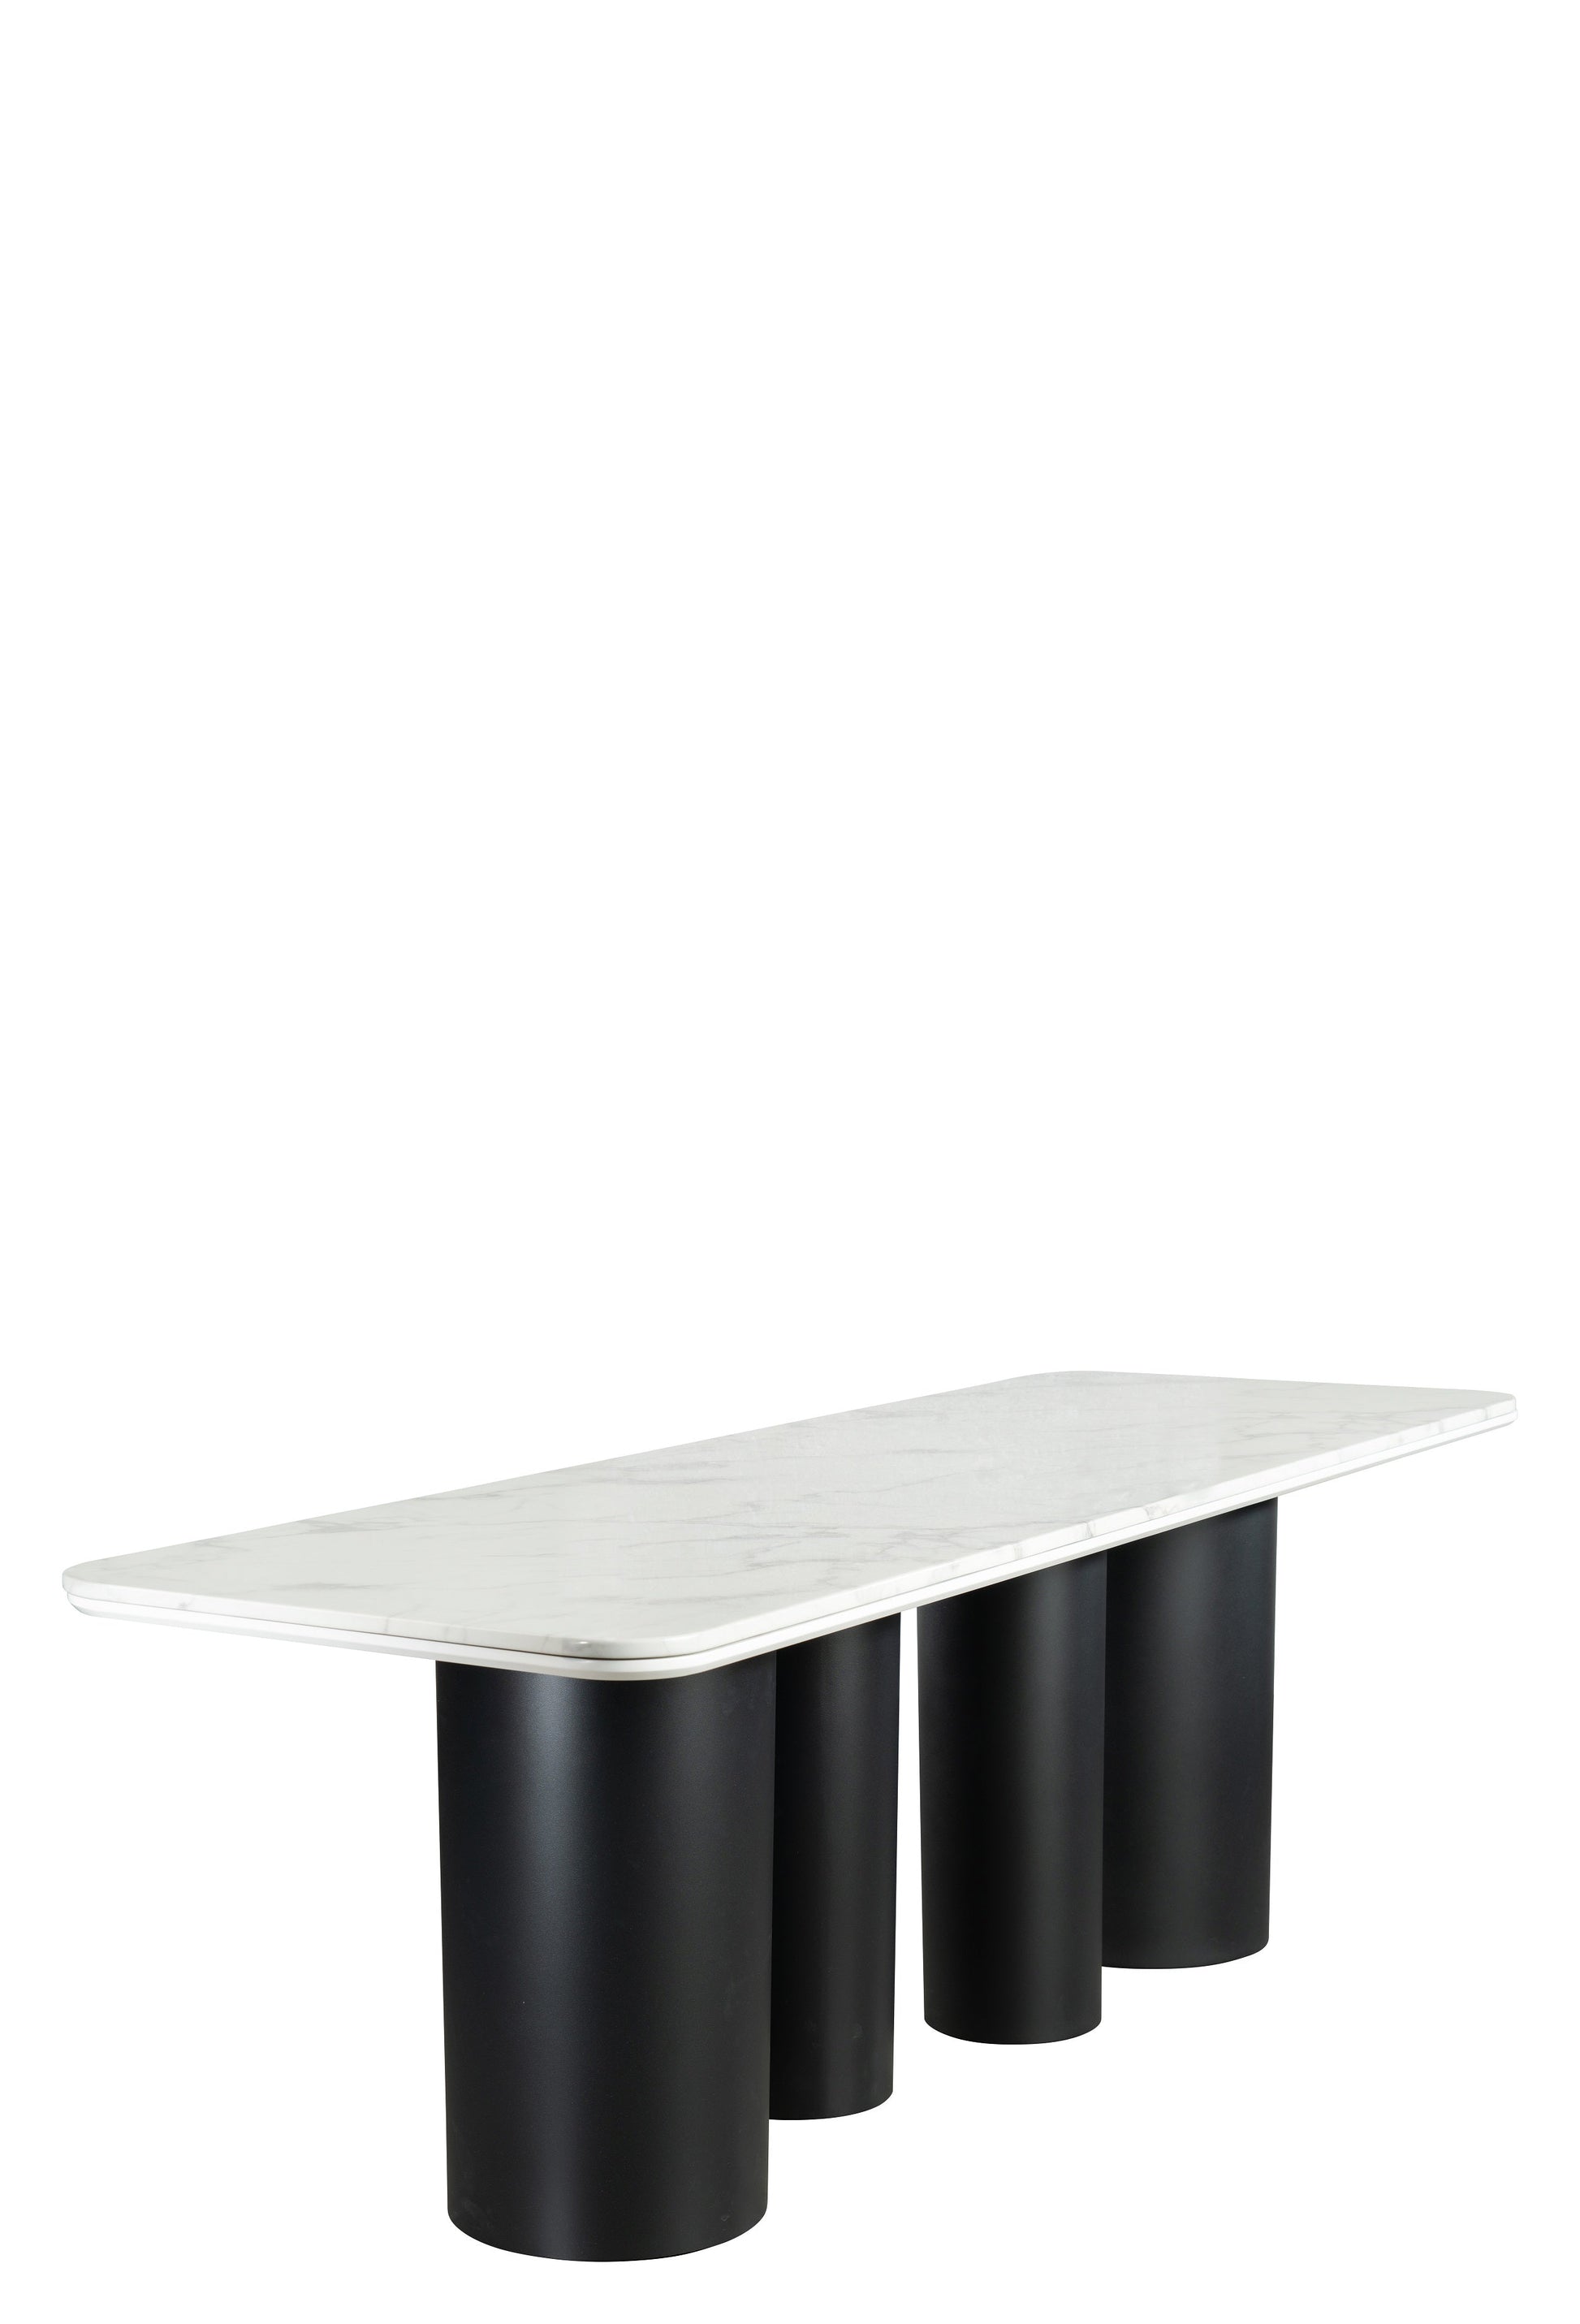 black and white dining table 